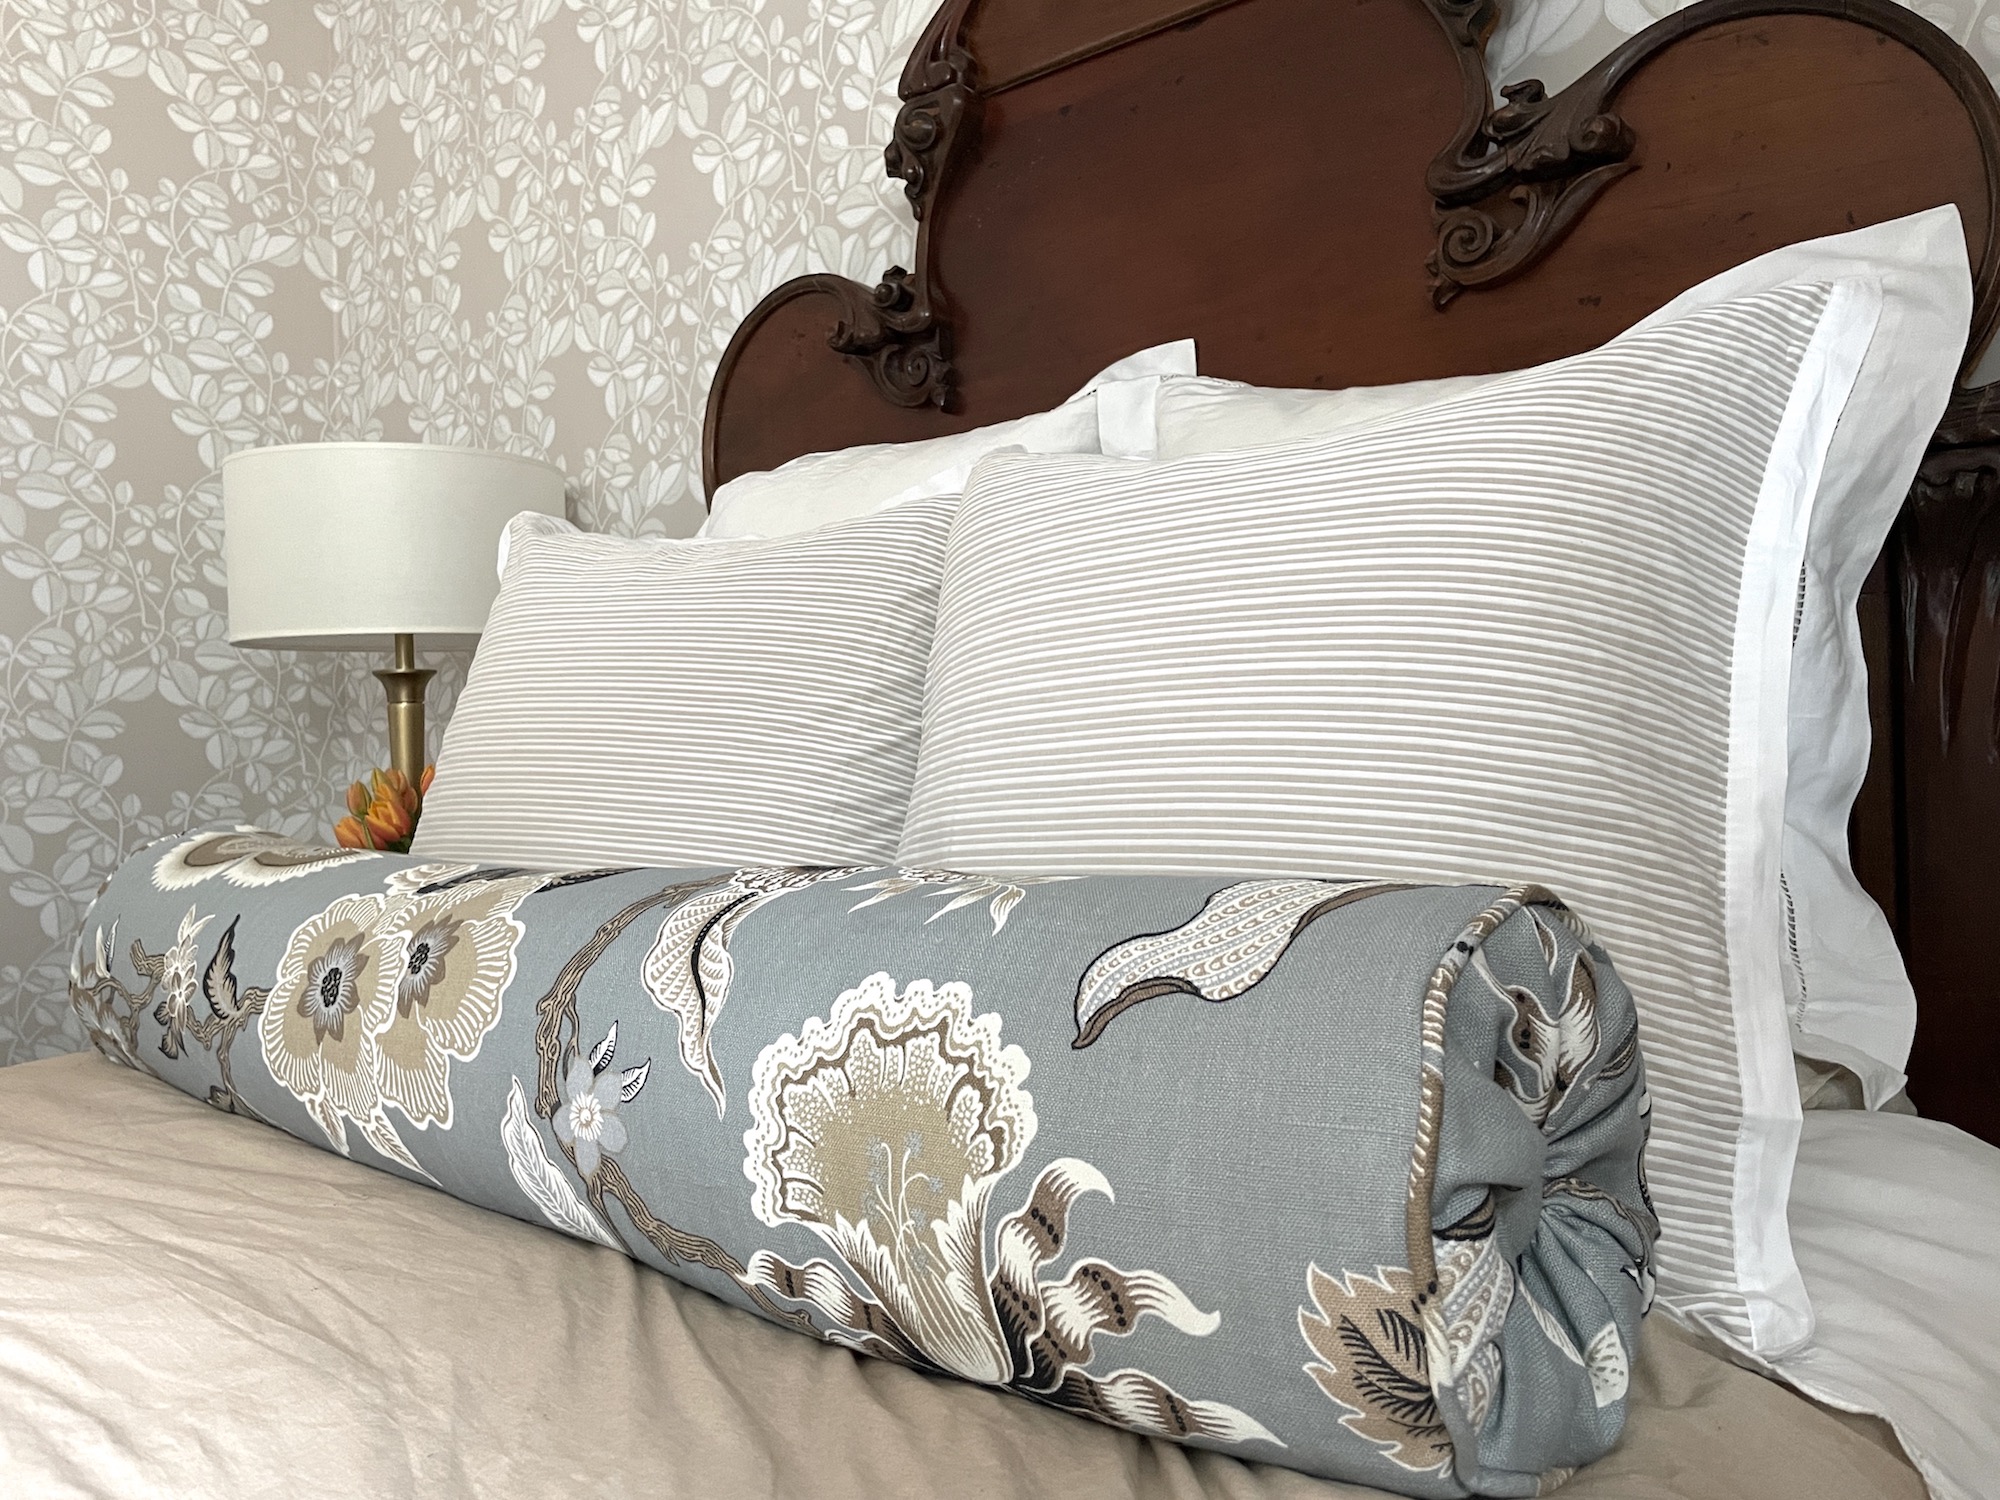 Why Not . . . Add a Traversin (aka Bolster) to your Bedroom?